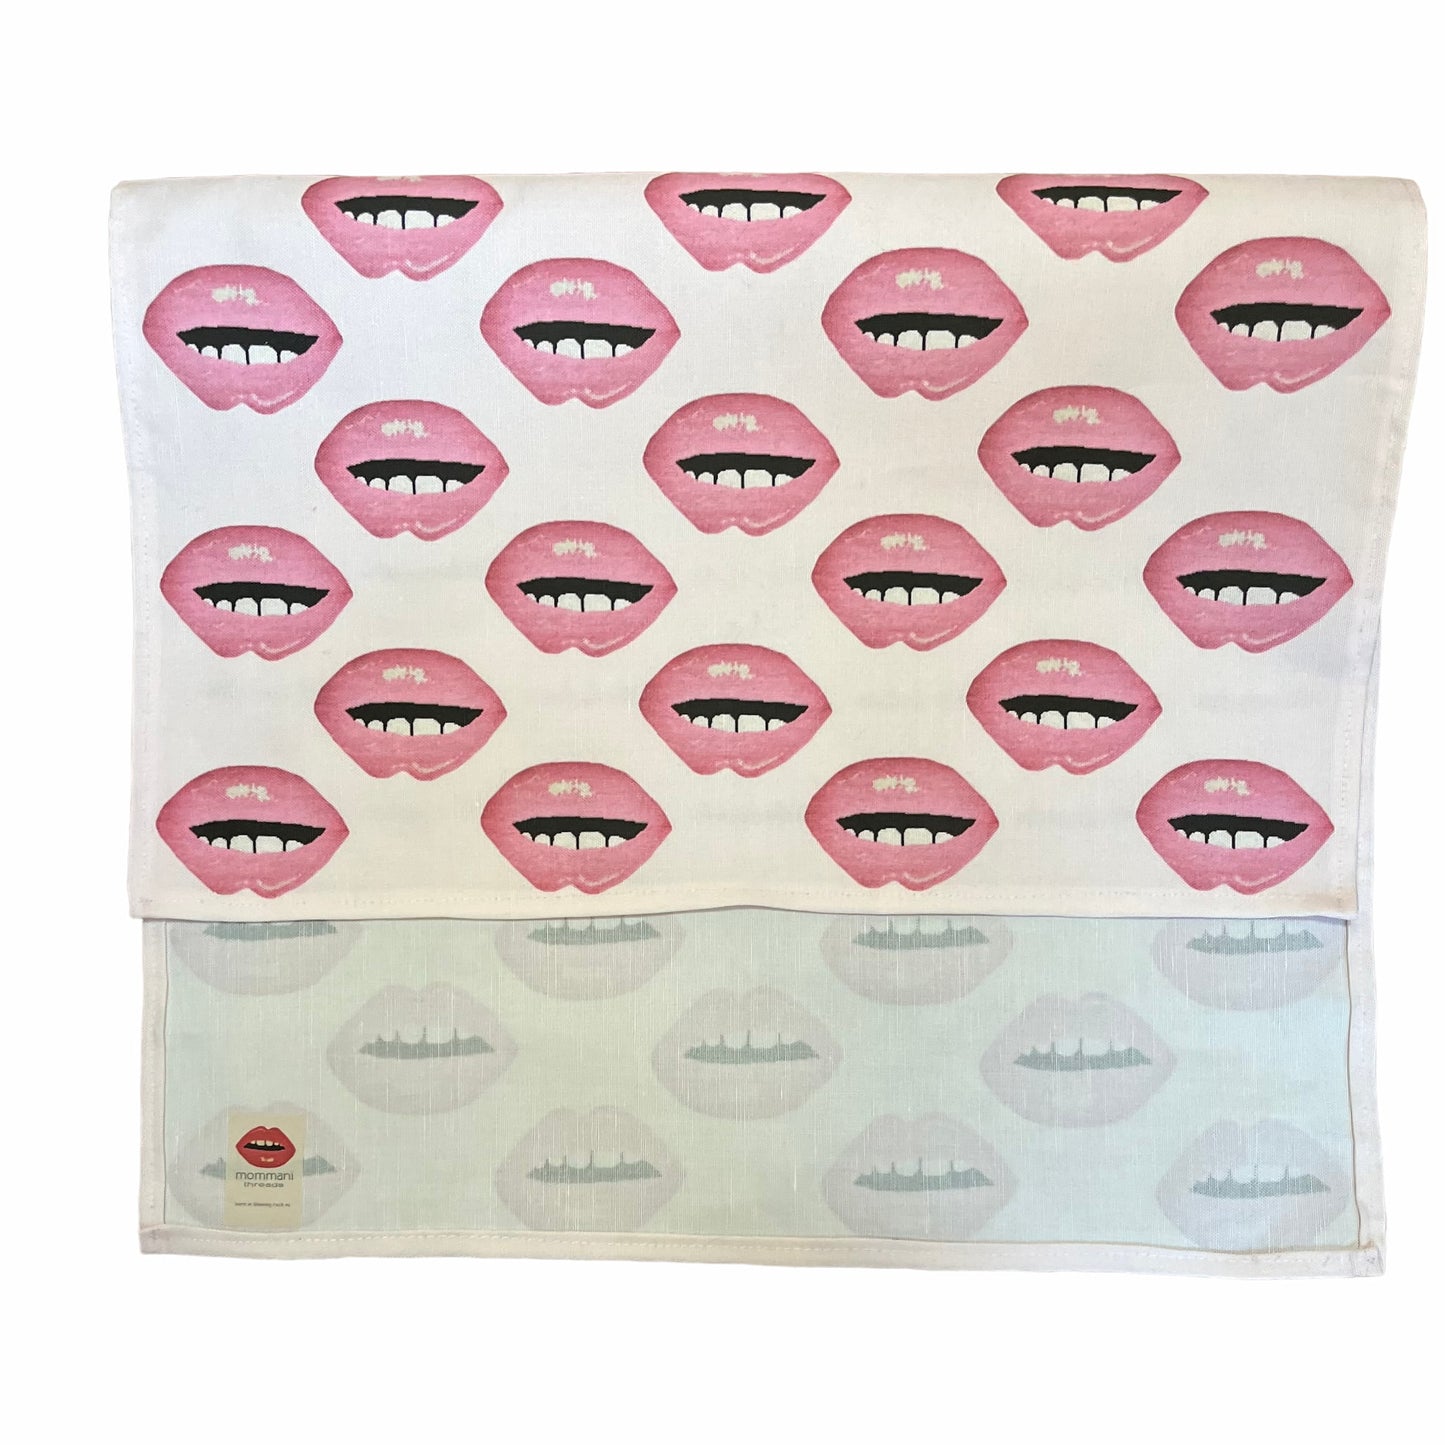 linen-colored tea towel with soft pink lips covered all over it